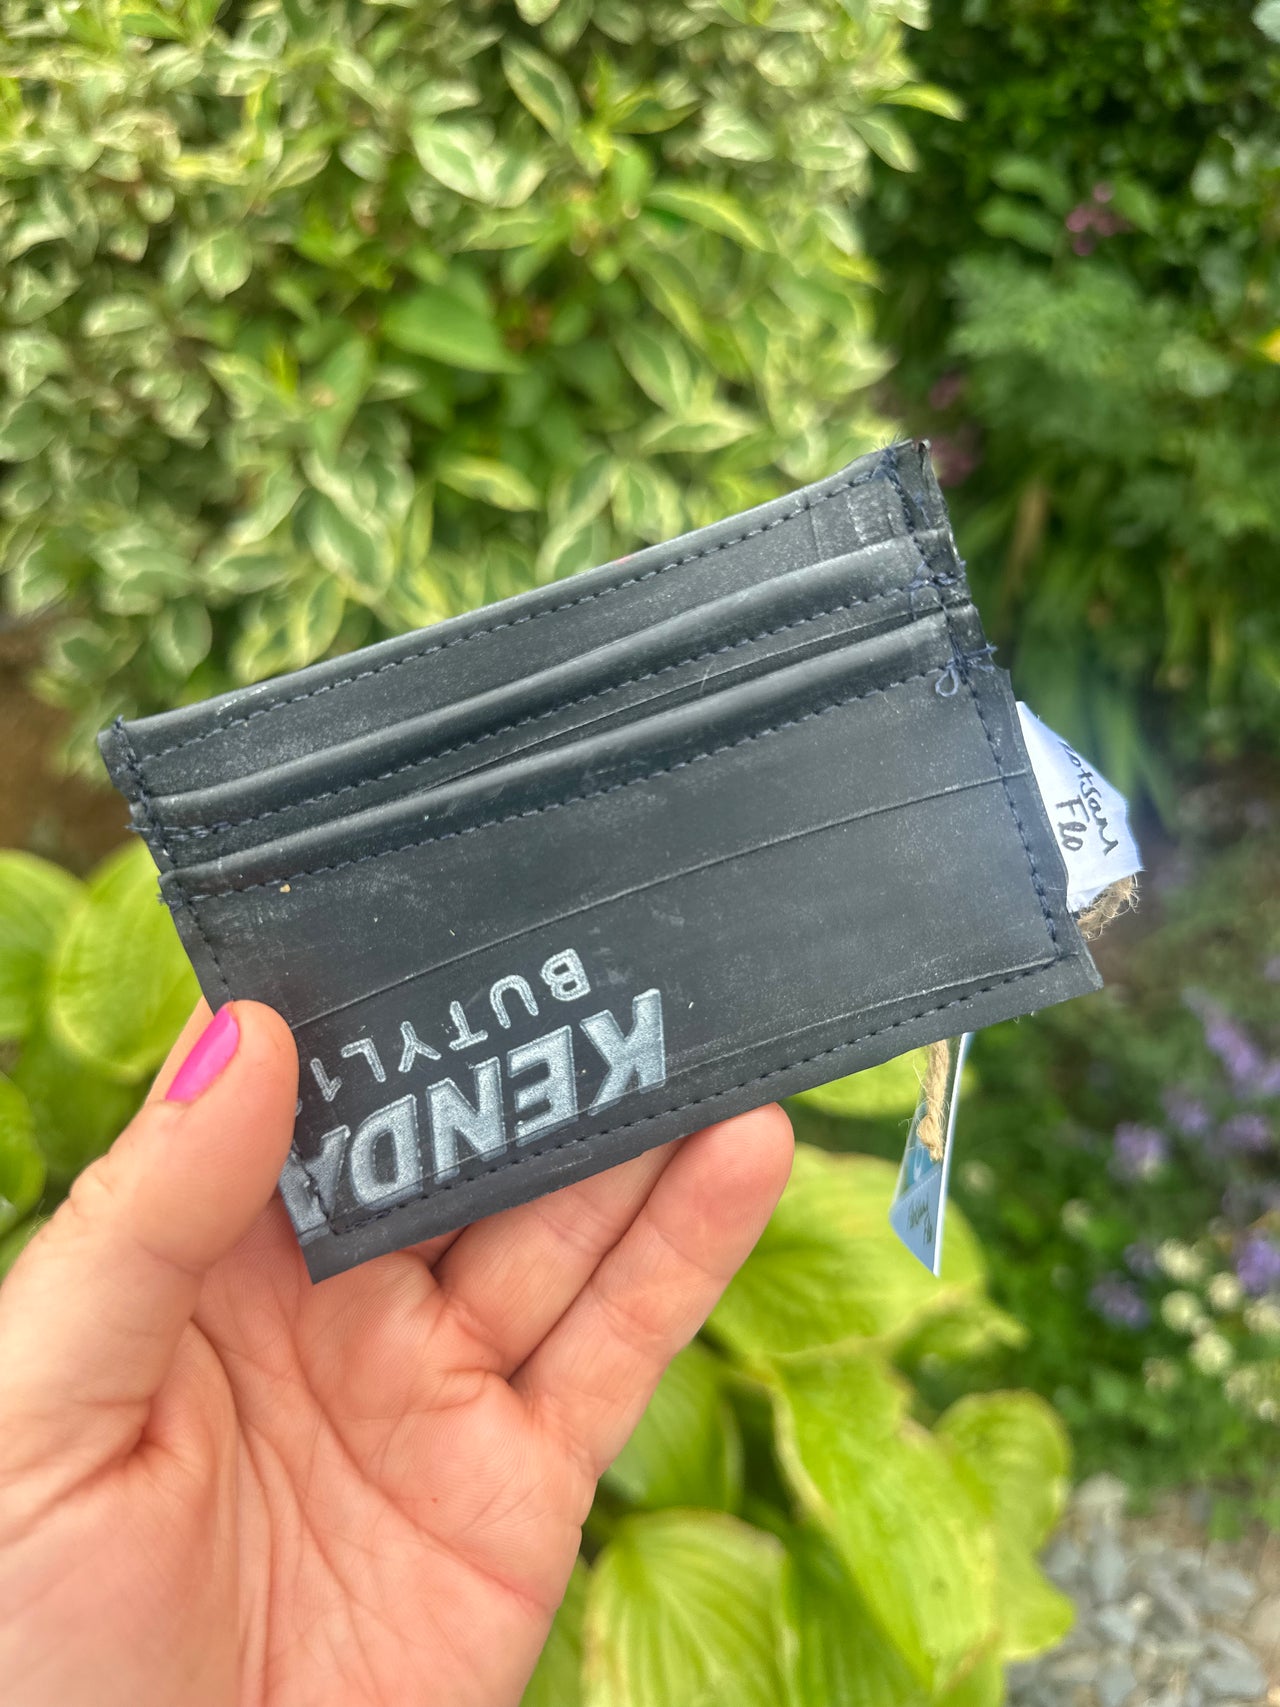 I used to be a Punctured Inner Tube - Card Holder